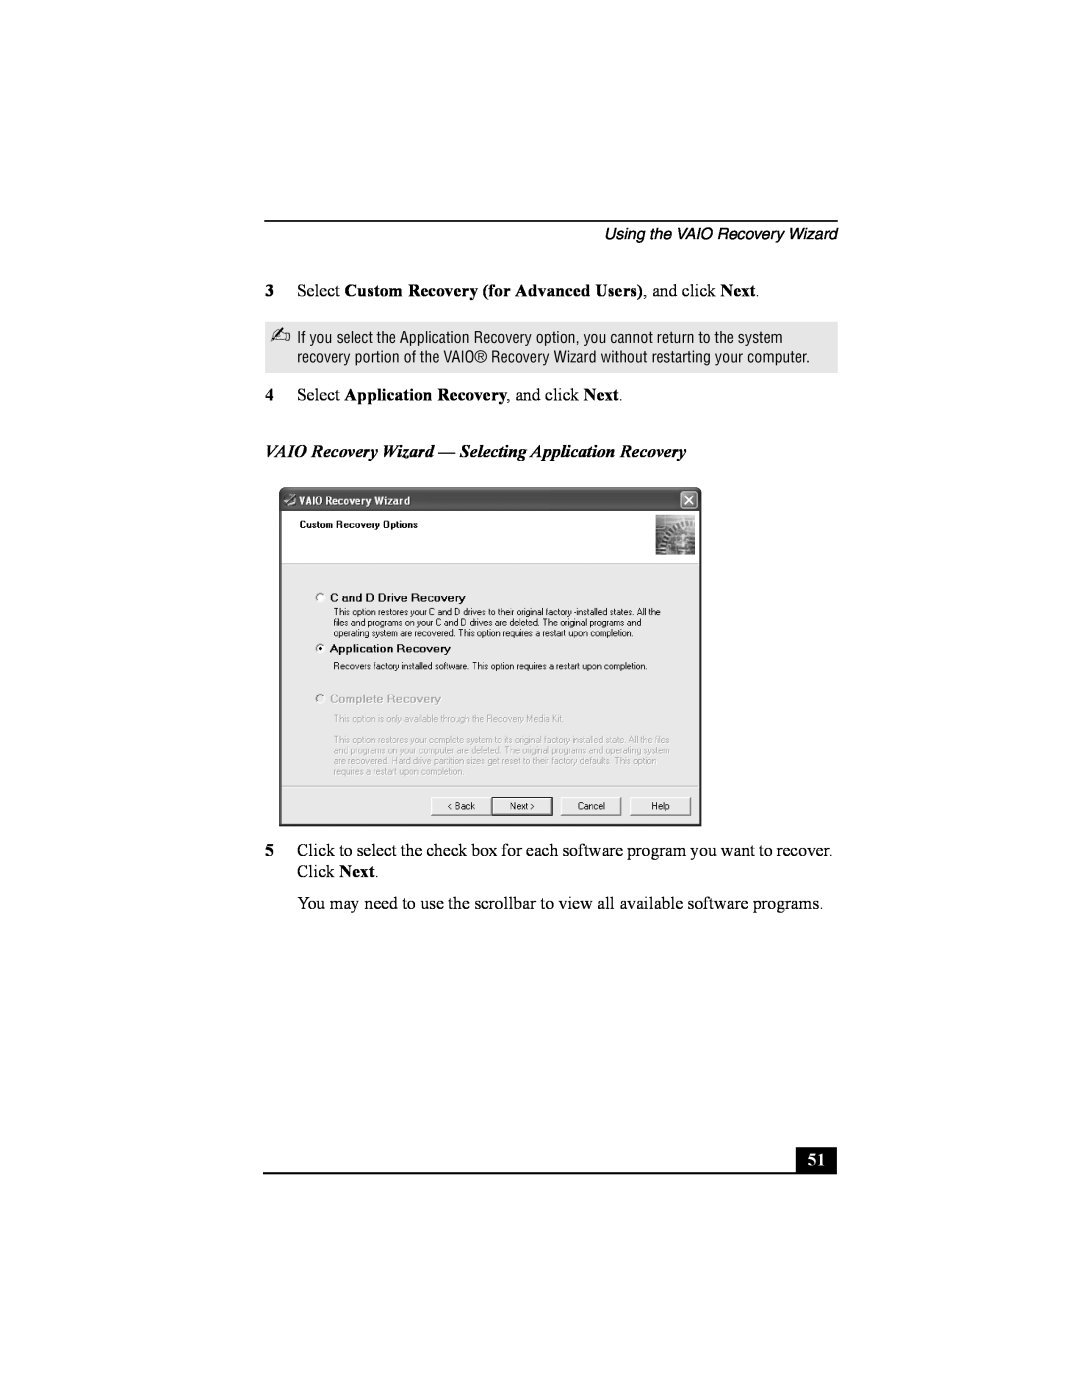 Sony PCG-FRV manual Select Custom Recovery for Advanced Users, and click Next, Select Application Recovery, and click Next 